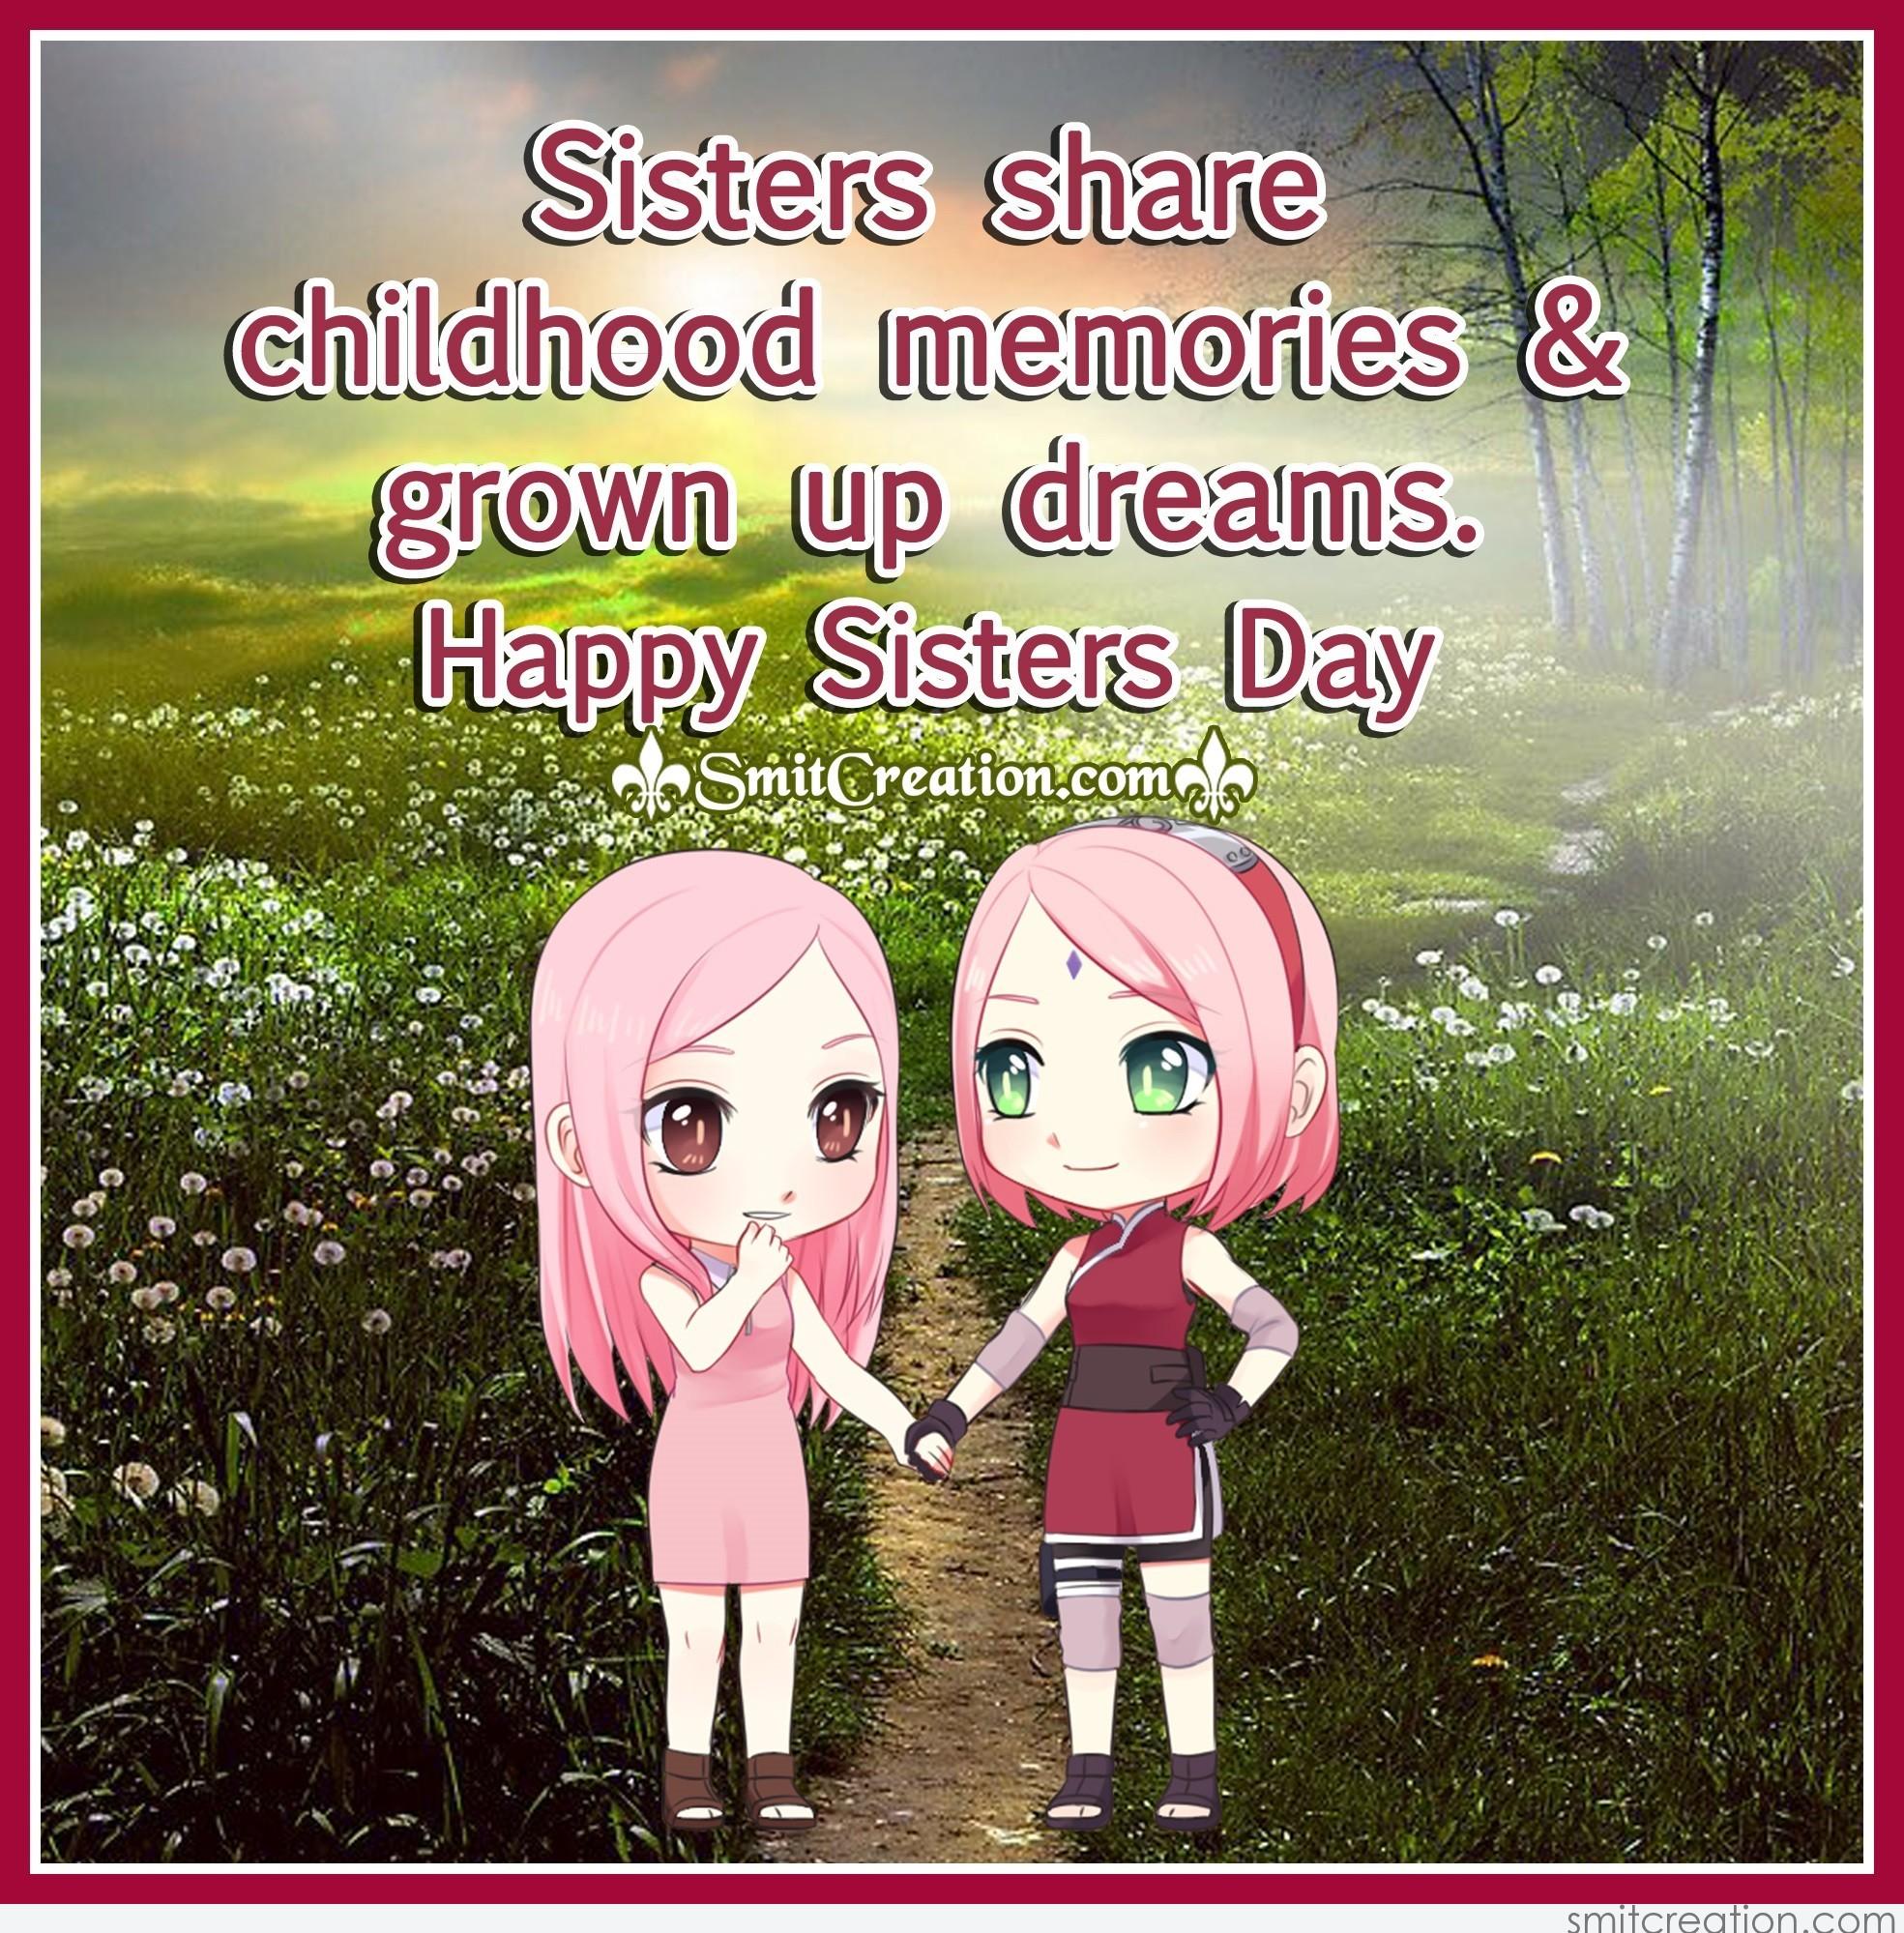 sisters share childhood memories & grown up dreams happy Sister’s Day